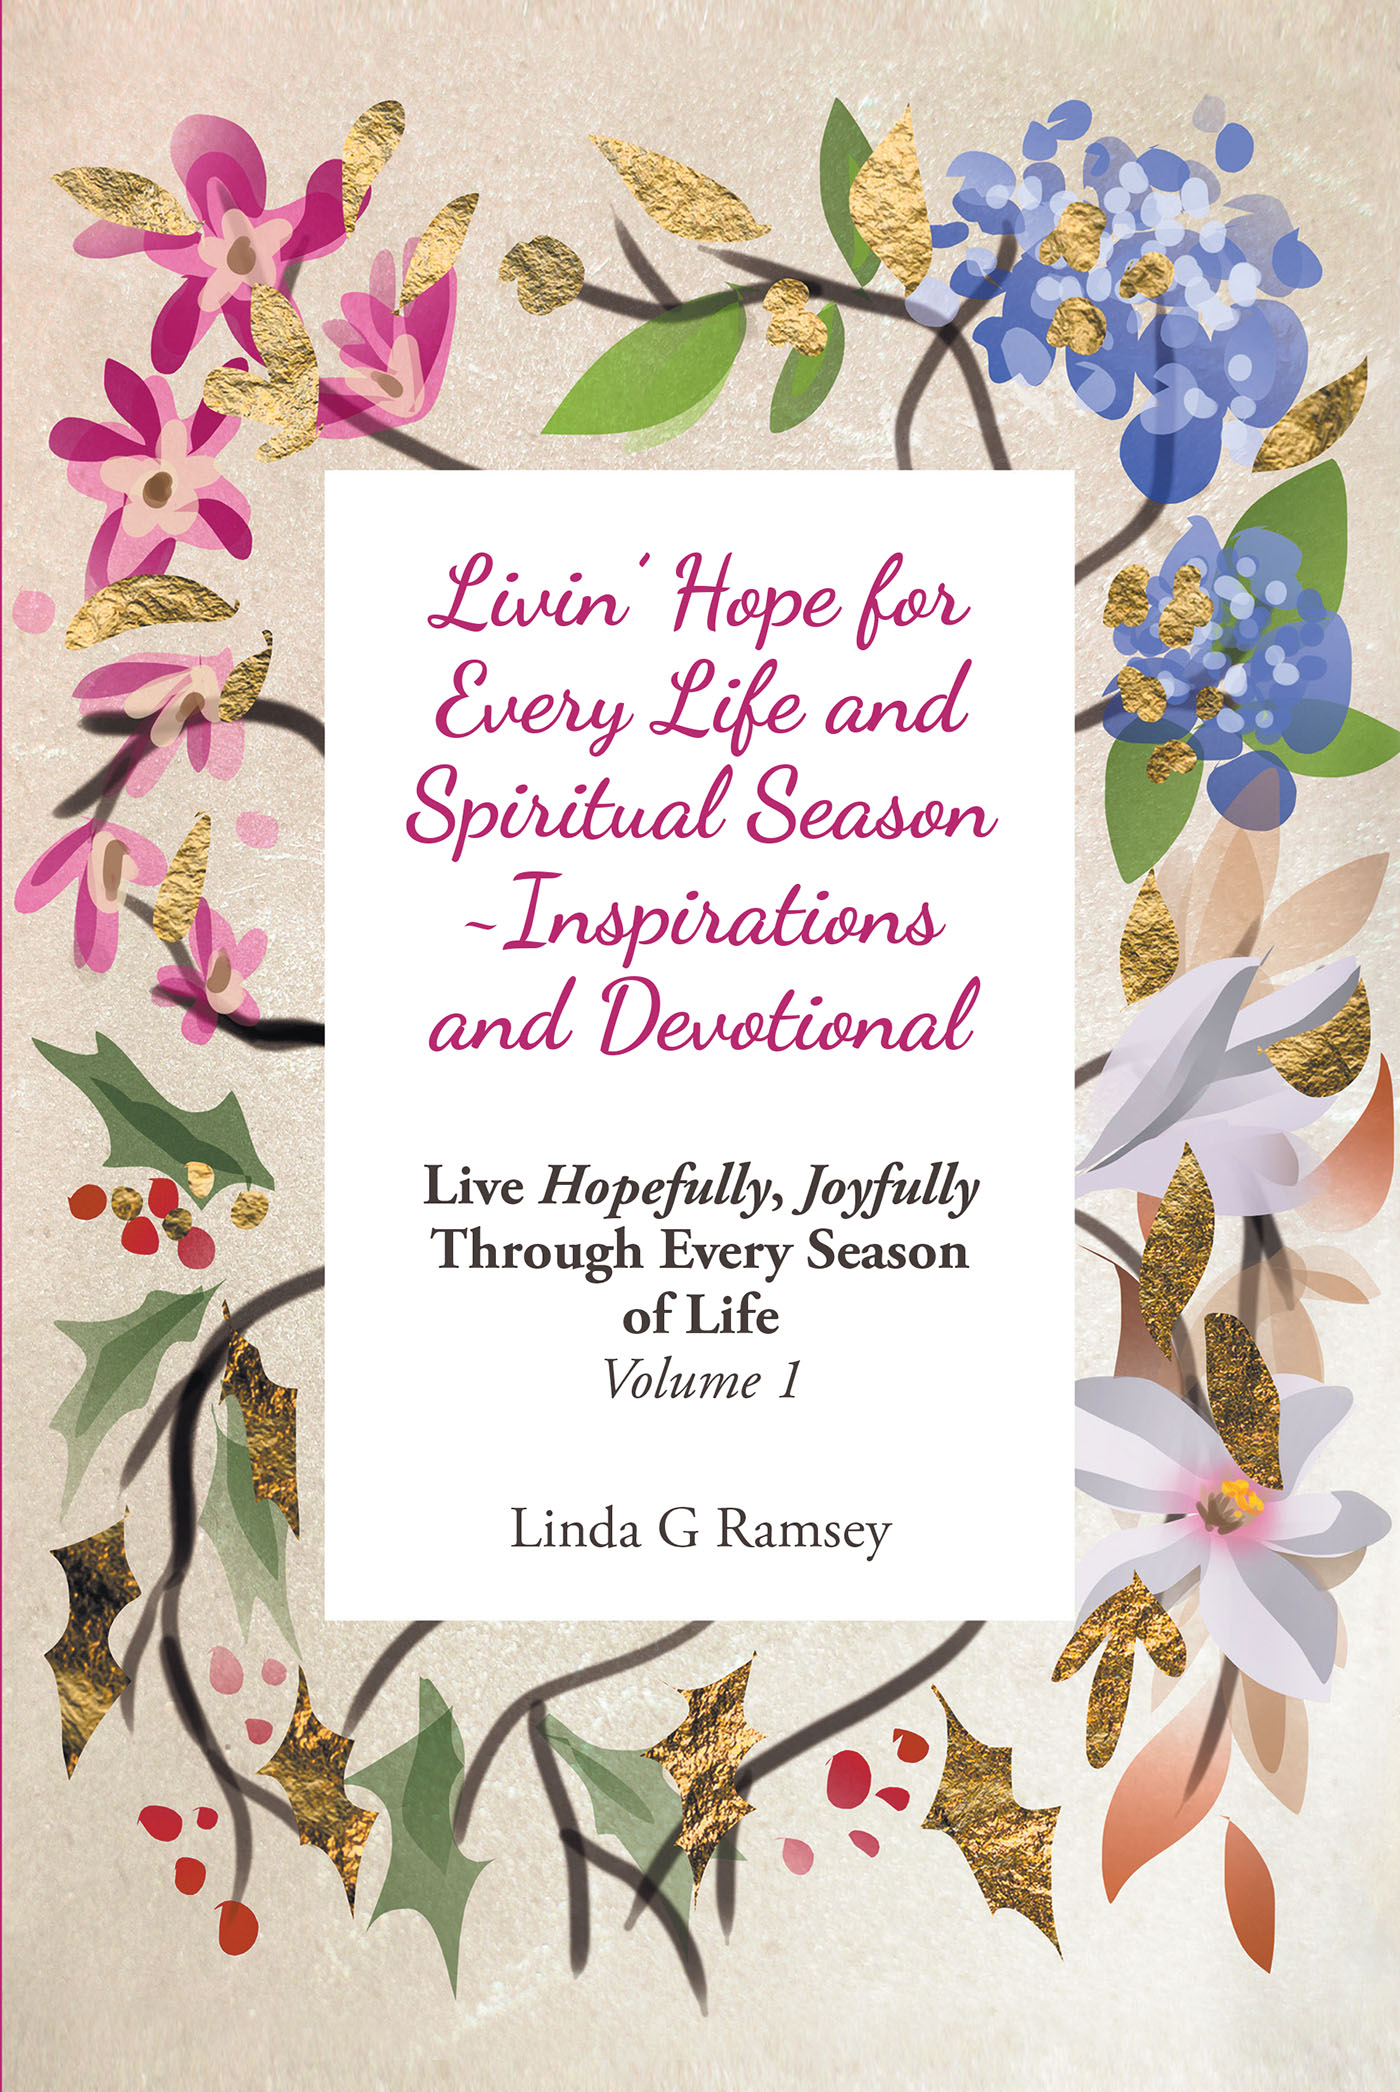 Author Linda G Ramsey’s "Livin’ Hope for Every Life and Spiritual Season" is an Uplifting and Inspiring Book of Reflection on Life’s Journey Through the Seasons of Life